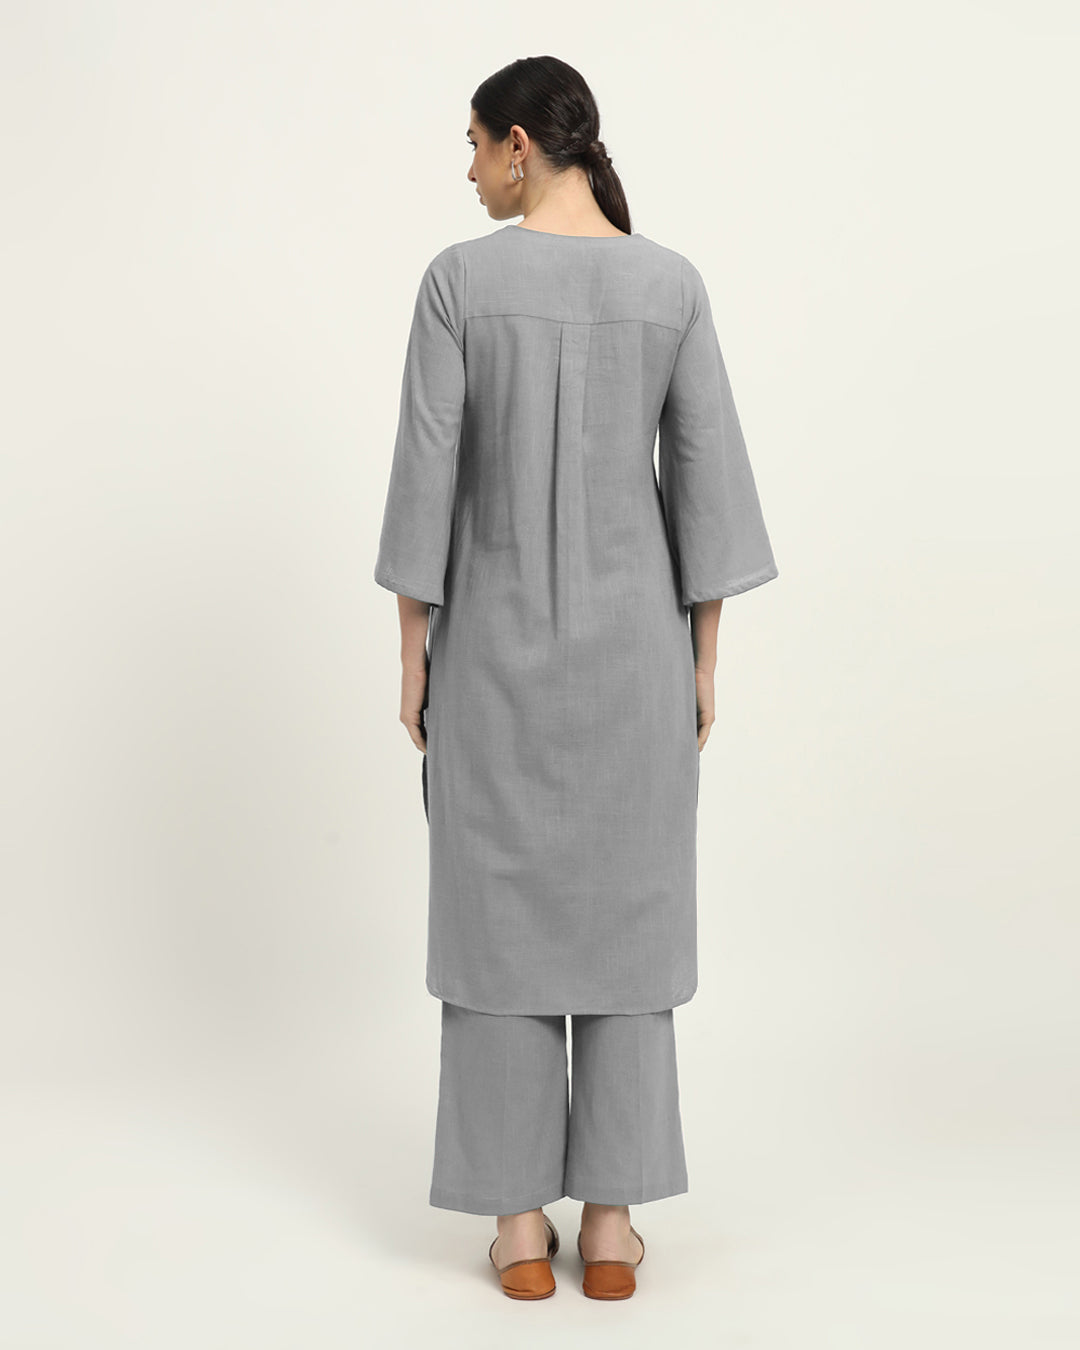 Combo: Iced Grey & Iris Pink Rounded Reverie Solid Kurta